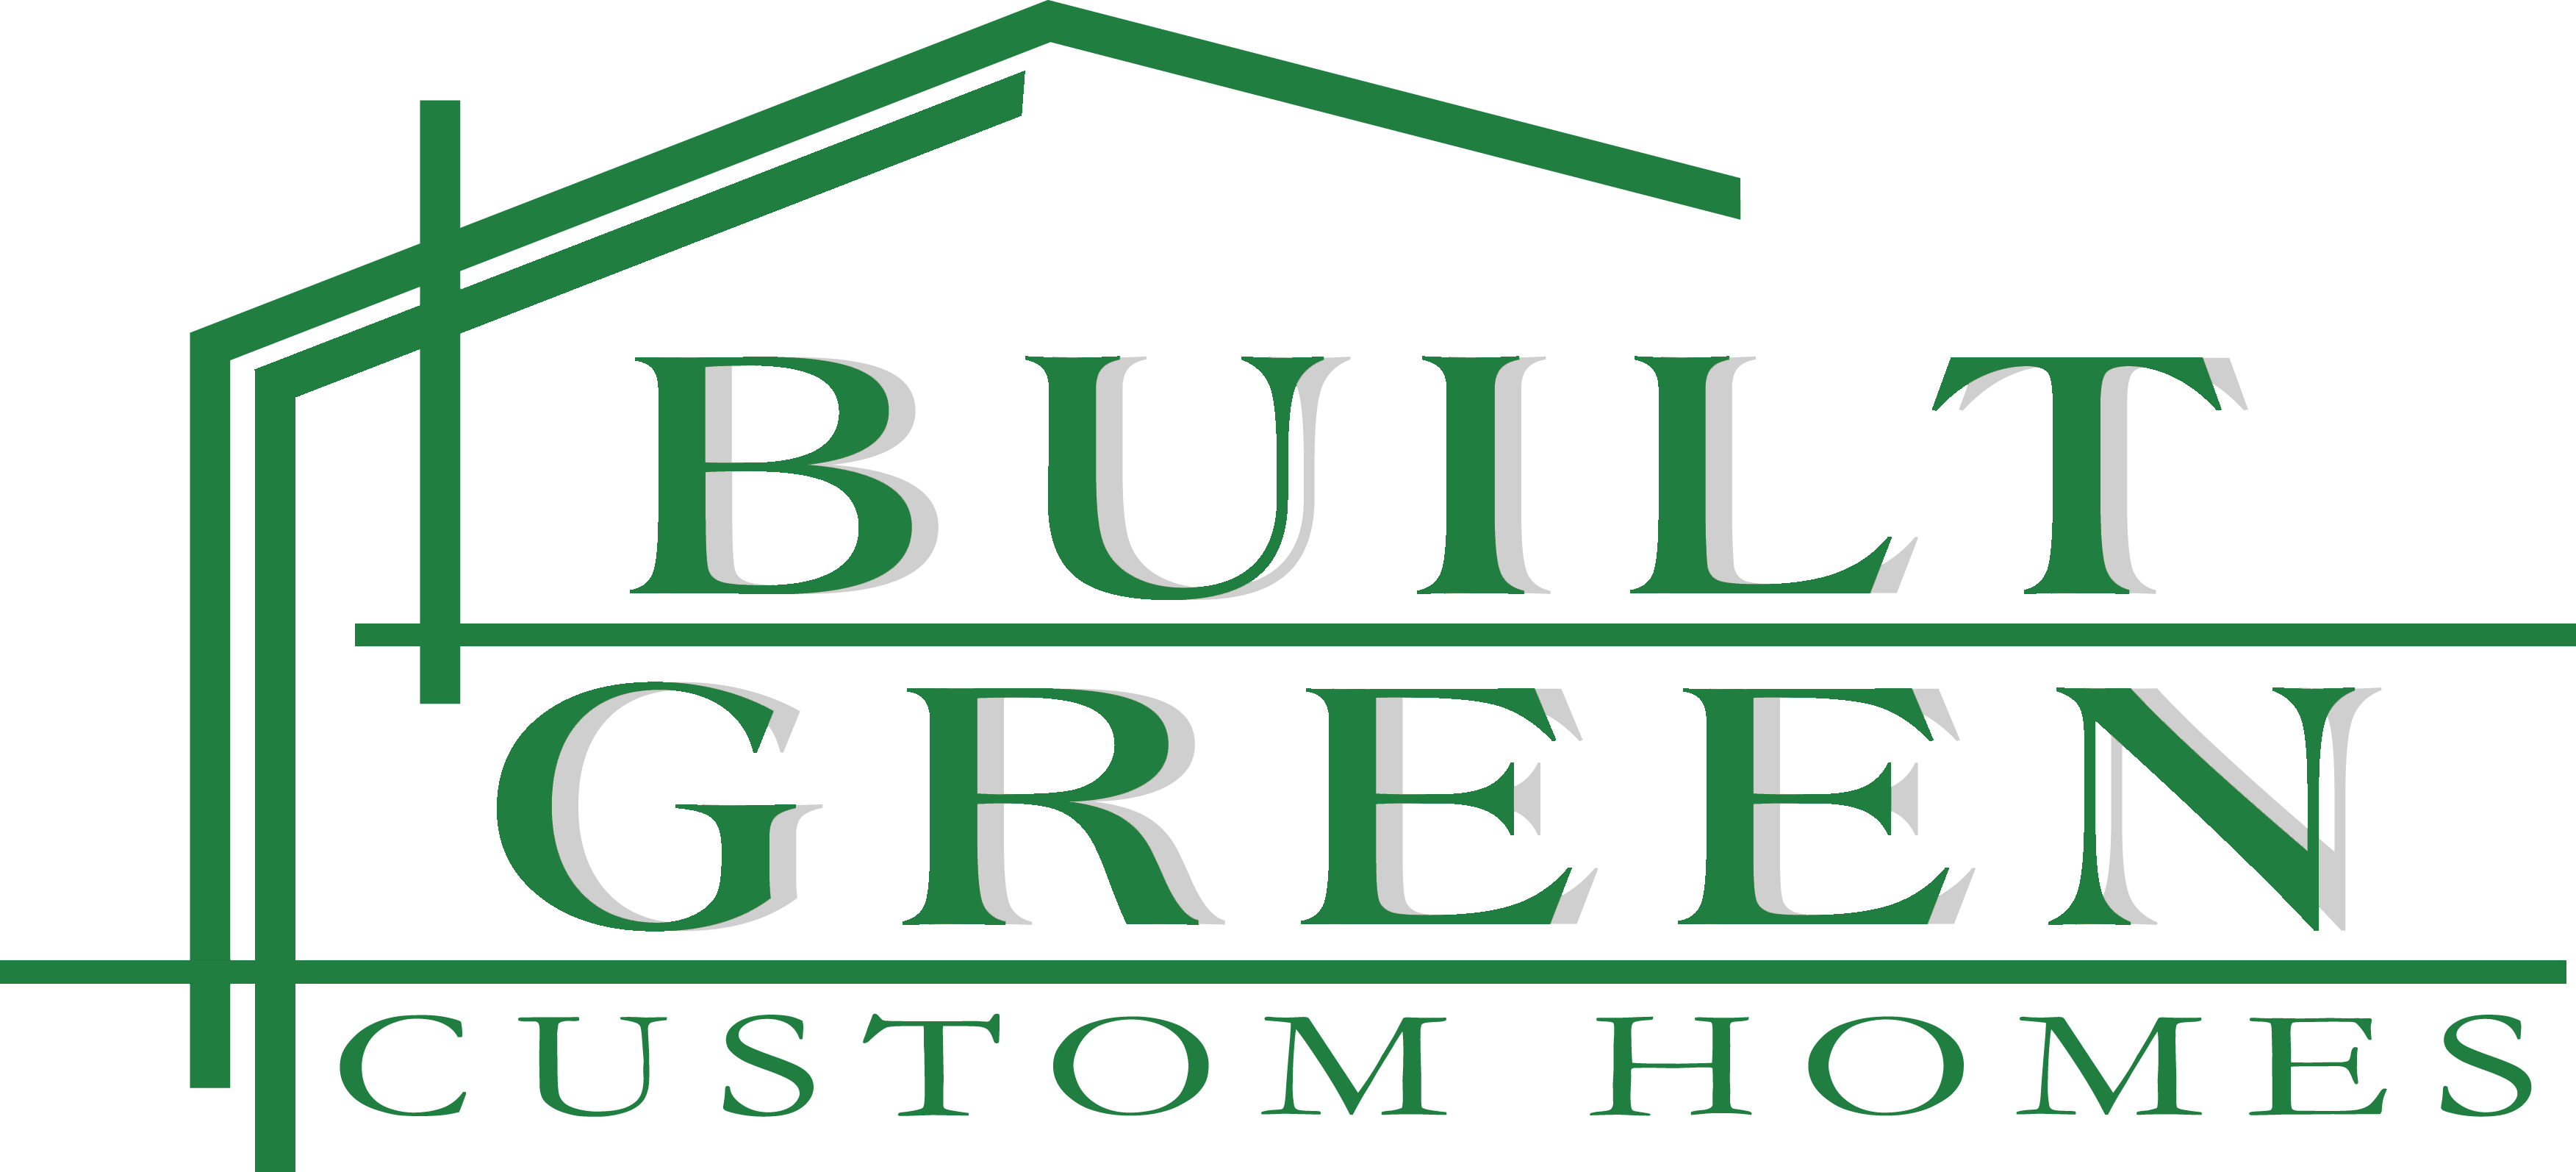 Build On Your Own Lot Areas Austin TX | Custom Home Builders